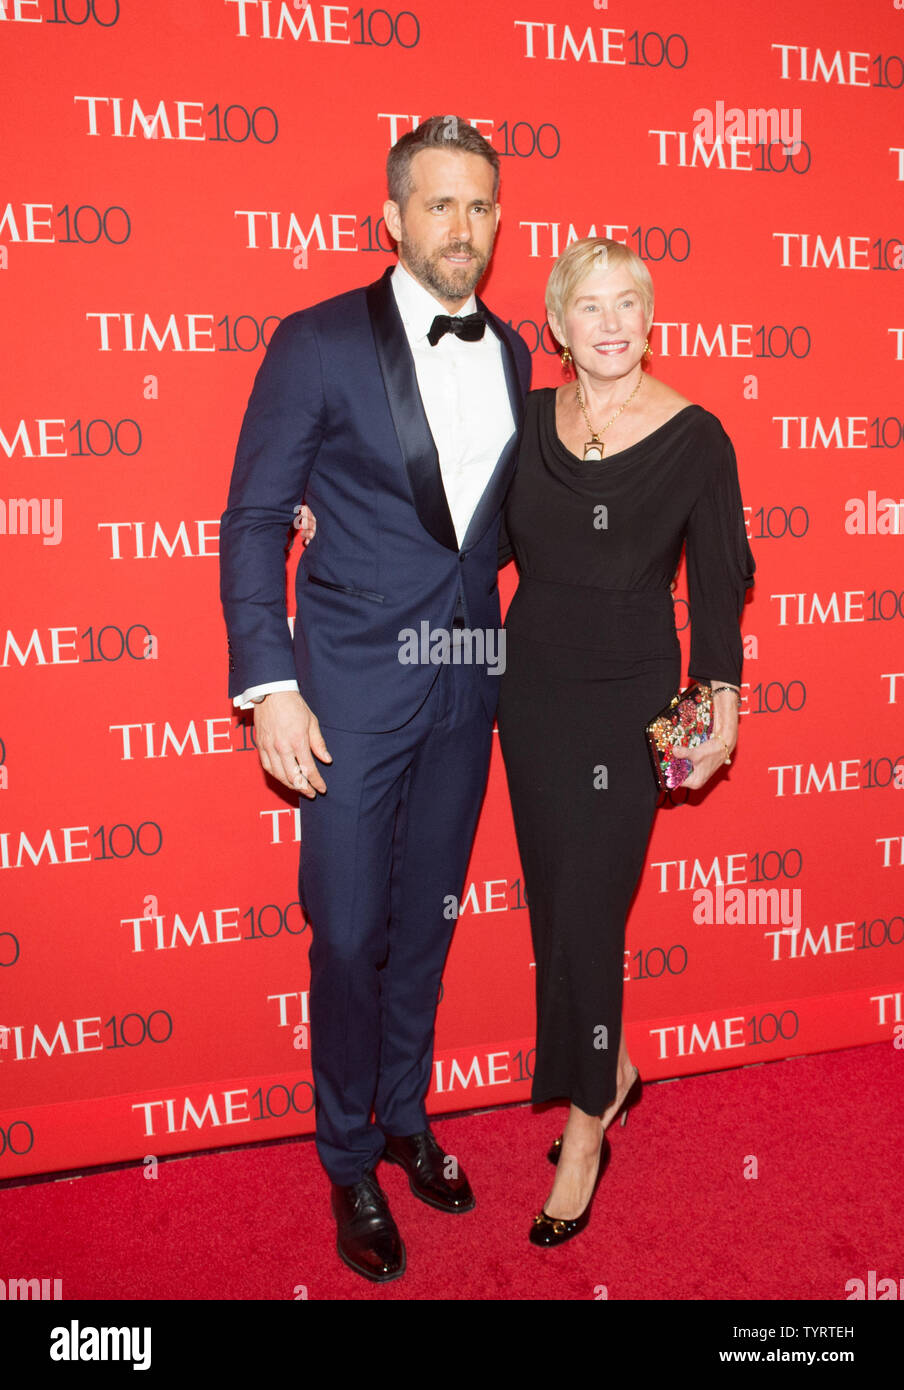 Ryan Reynolds and Tammy Reynolds arrive on the red carpet at the TIME 100  Gala at Frederick P. Rose Hall, Home of Jazz at Lincoln Center, in New York  City on April